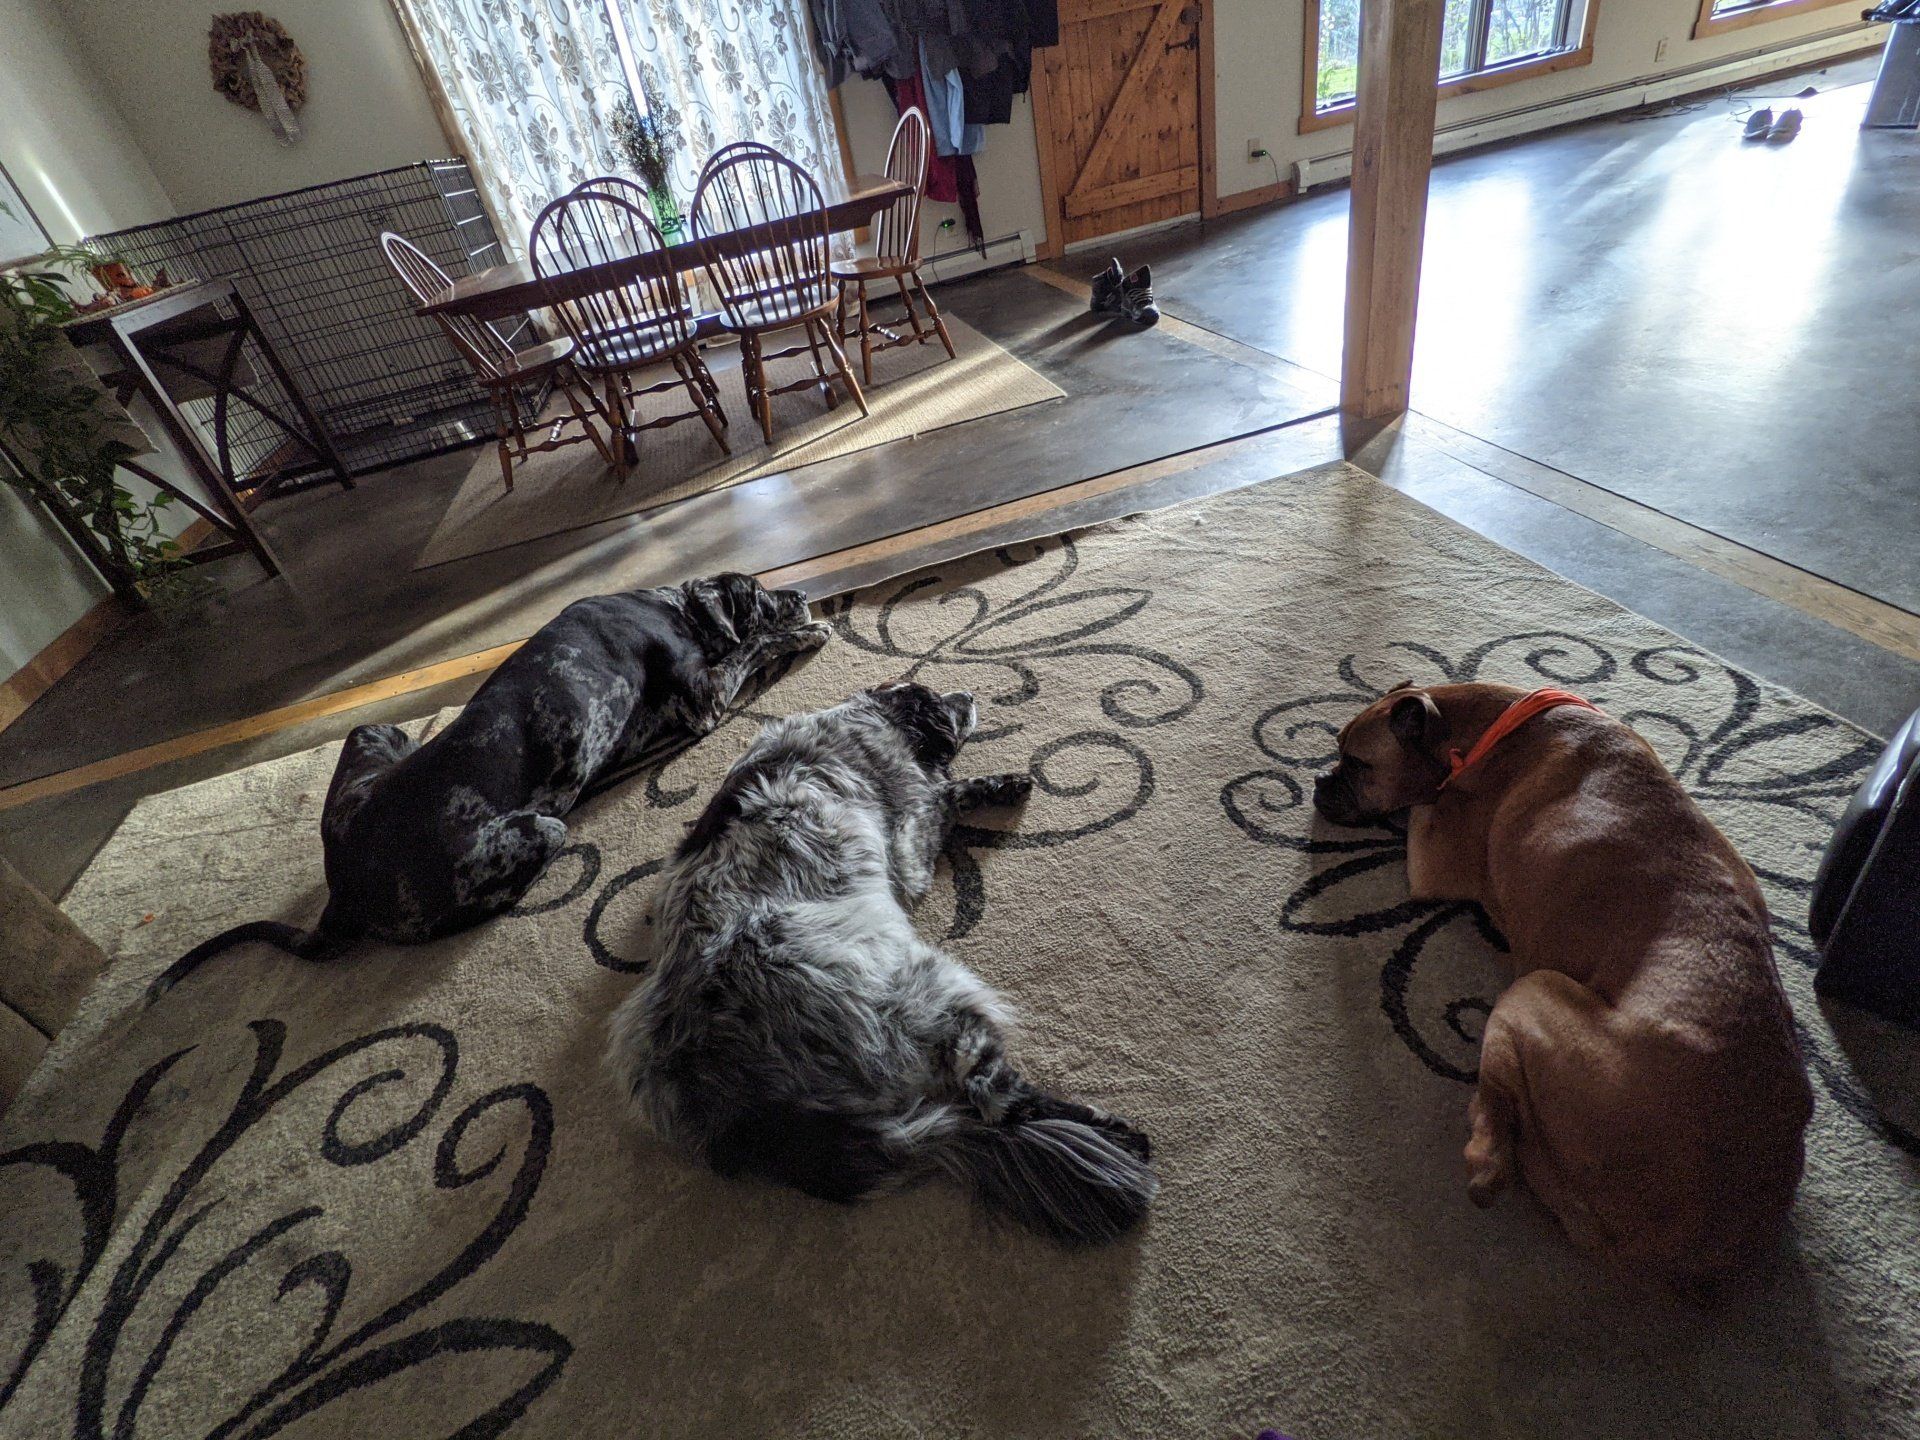 3 dogs laying on a rug in the house